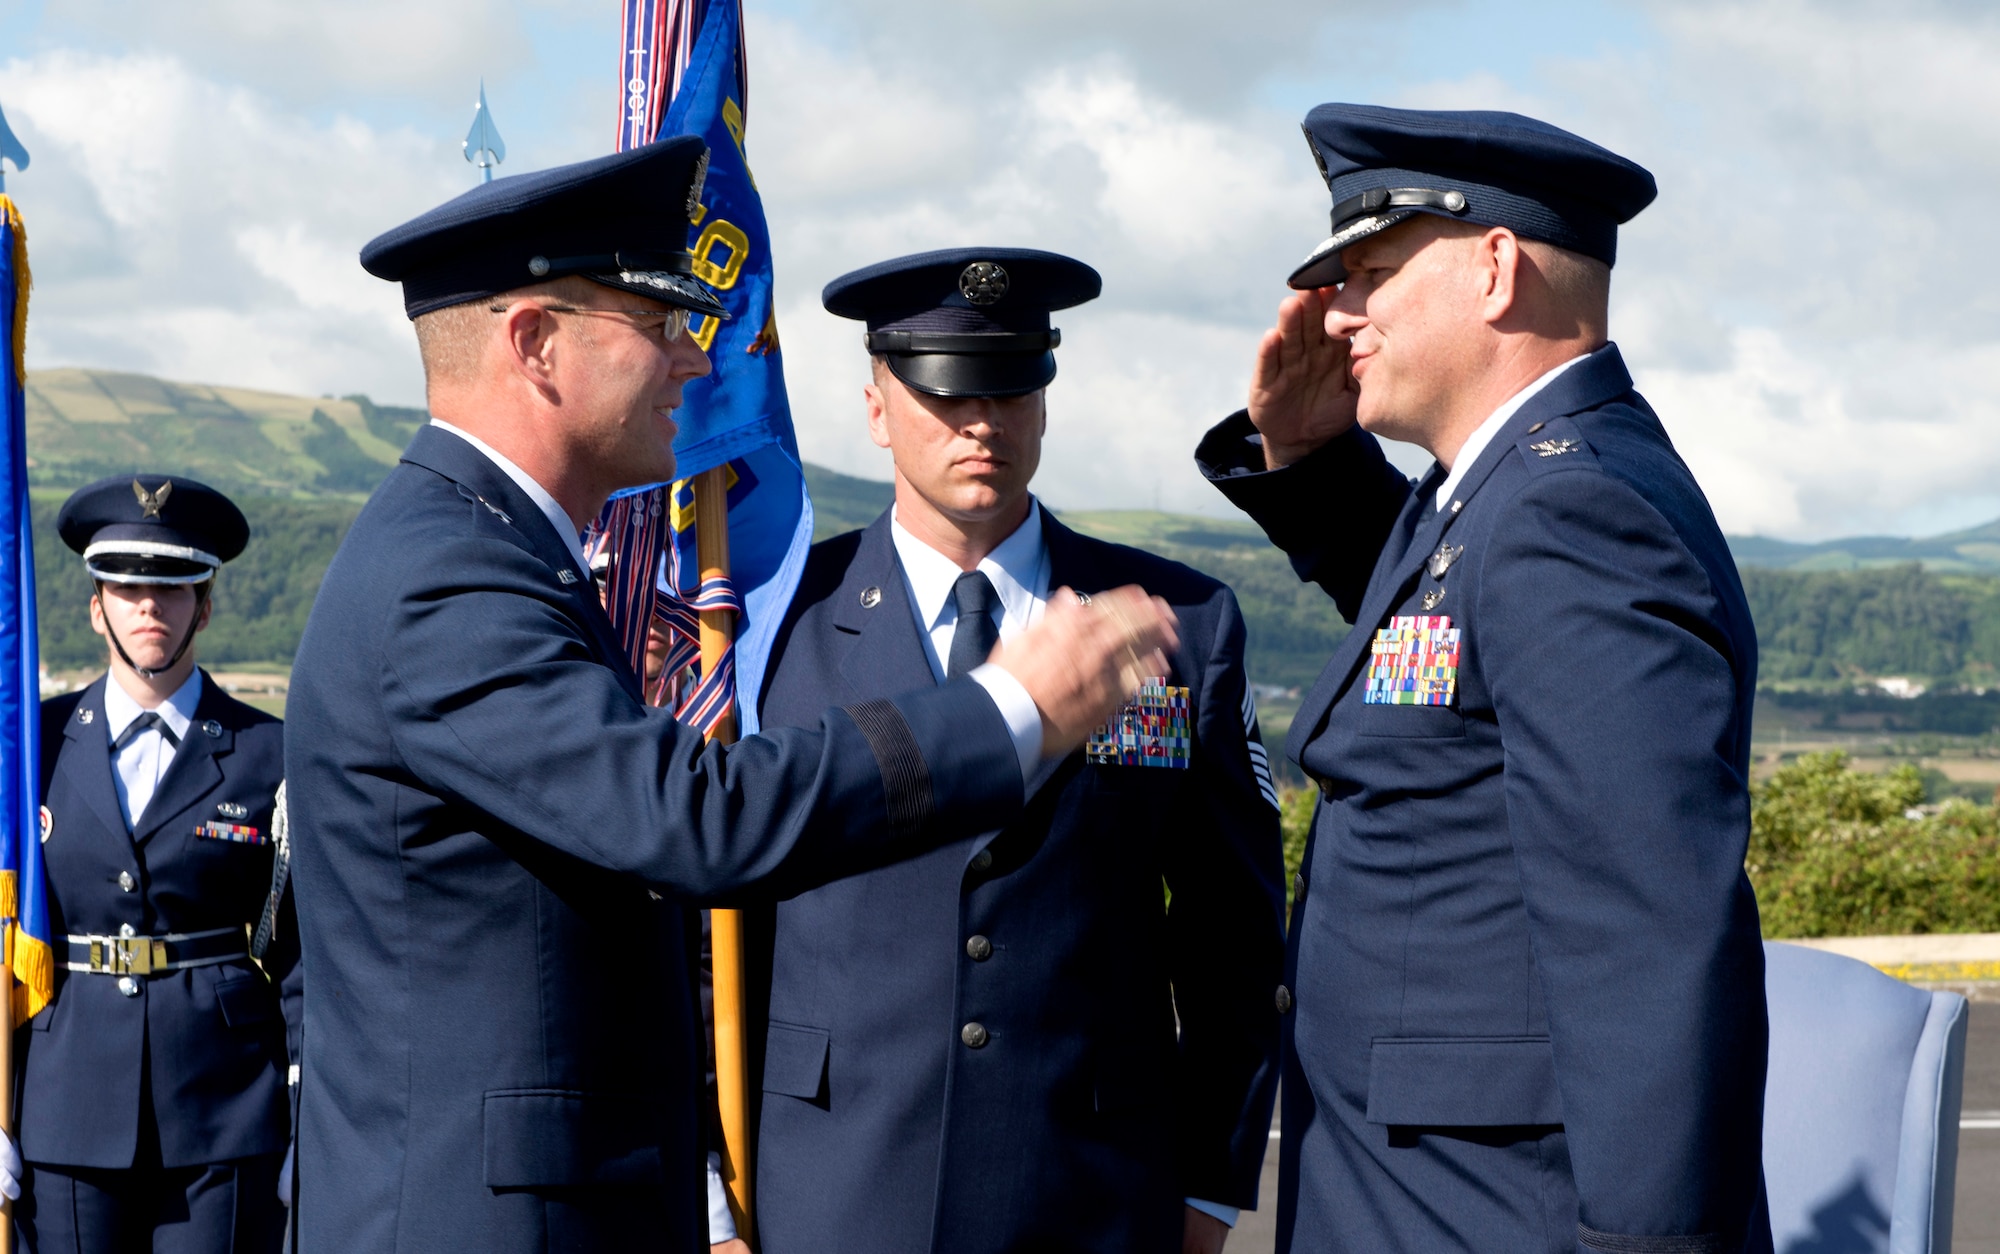 Col. Richard Sheffe, commander of the 65th Air Base Group, salutes Brig. Gen. Jon Thomas, commander of the 86th Airlift Wing, Ramstein Air Base, Germany, while assuming command of the 65th Air Base Group during a Redesignation Ceremony on Lajes Field, Azores, Portugal, August 14, 2015. With this Redesignation Ceremony, the 65th Air Base Group is now aligned under the 86th Airlift Wing and remains positioned to provide agile combat support and services to aircraft and aircrews. (U.S. Air Force photo by Master Sgt. Bradley C. Church)